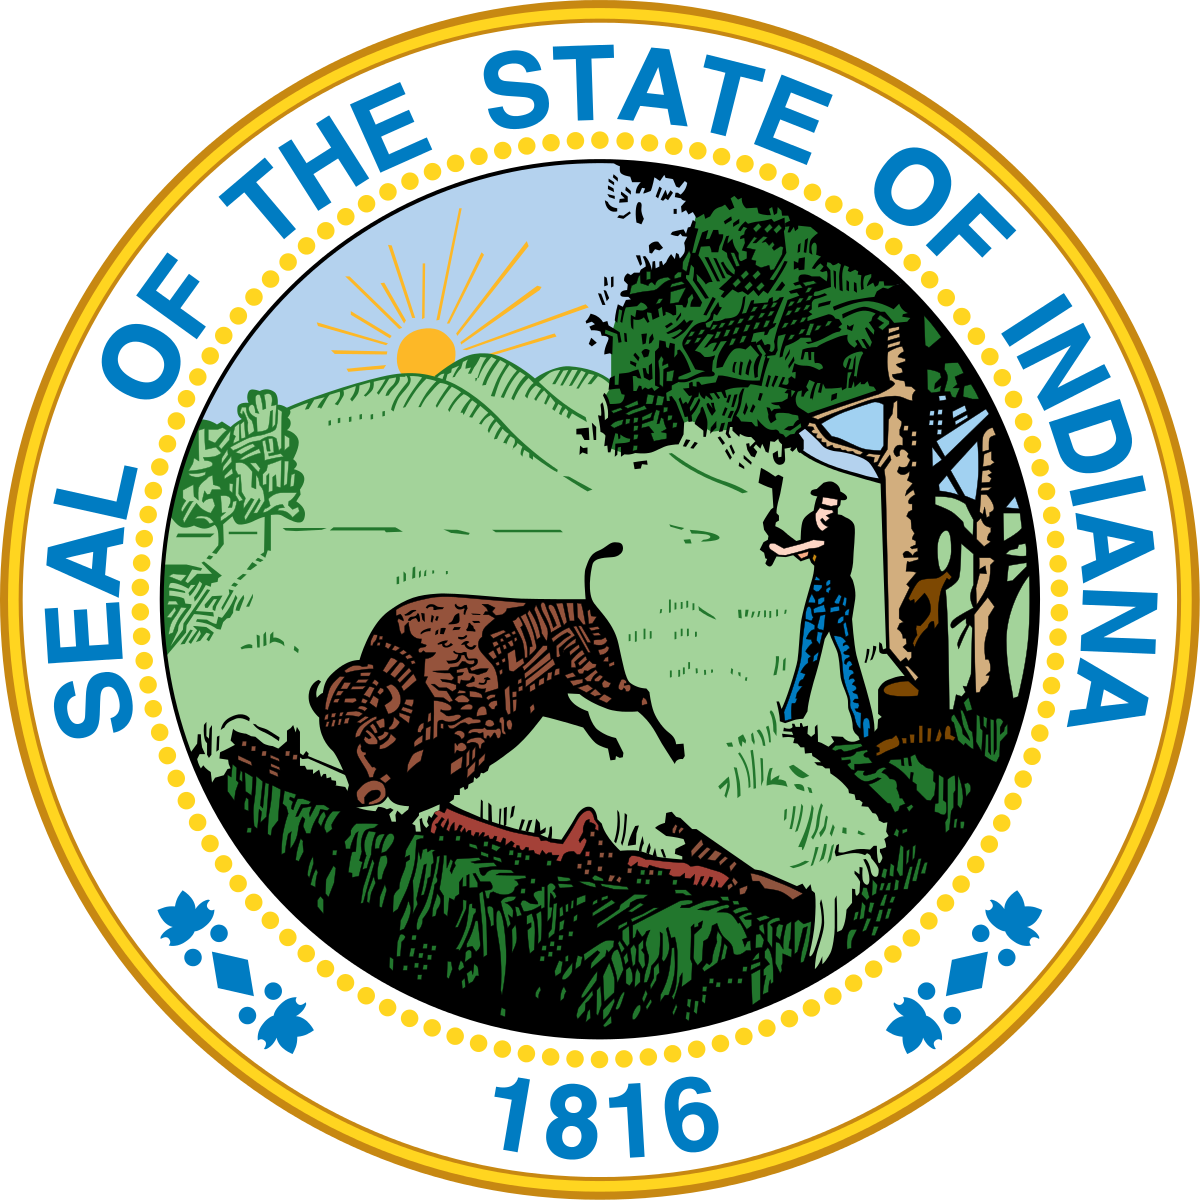 The state seal of Indiana